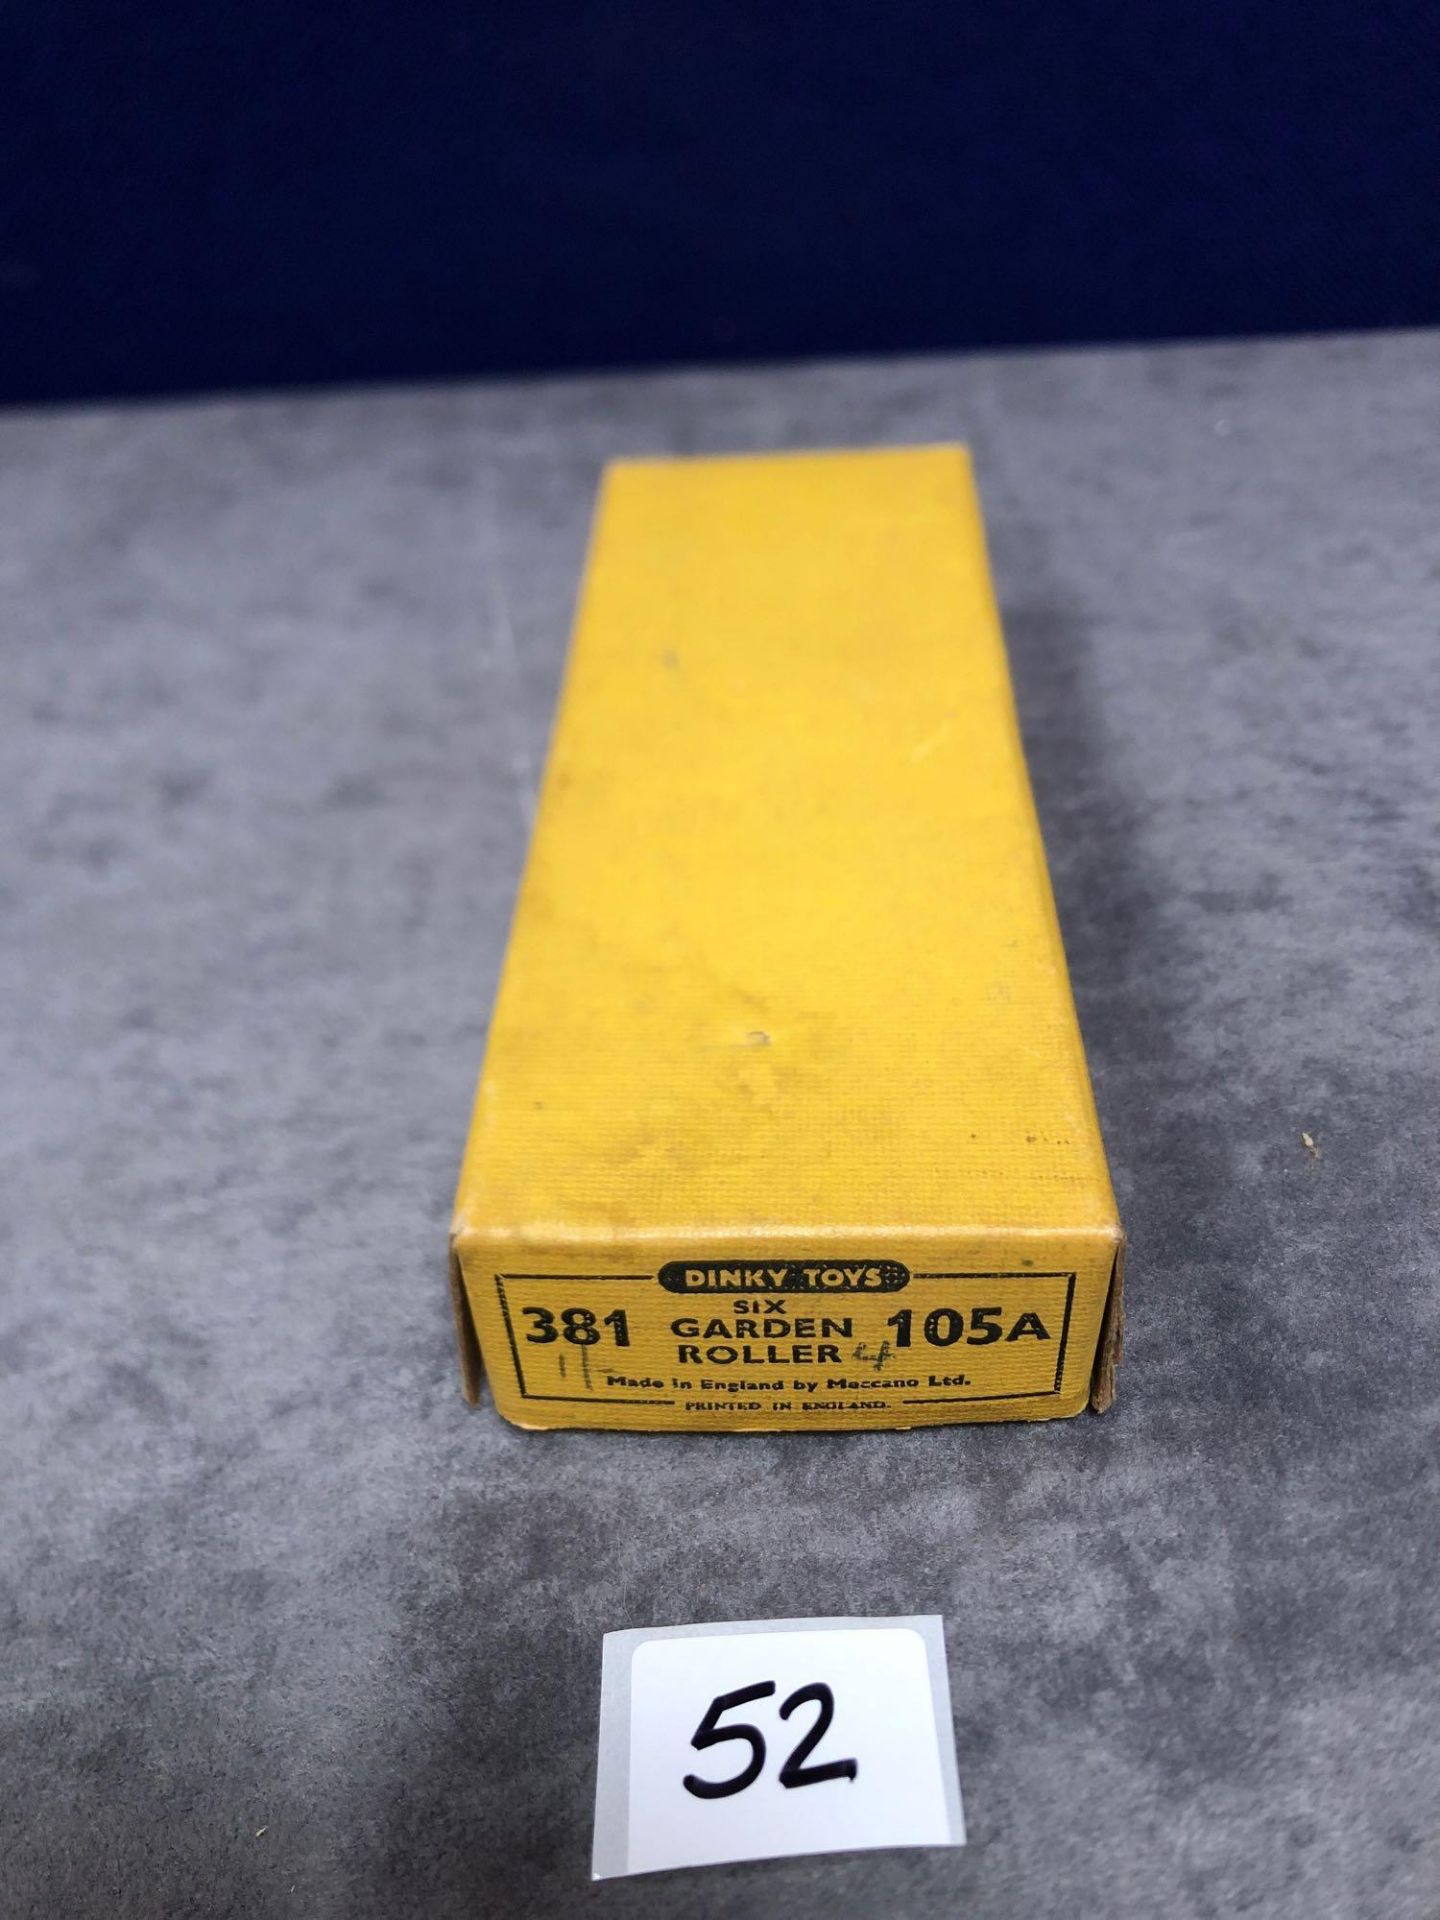 Dinky #381 Garden Roller Trade Box Contains 2 Rollers In Box 1948-1958